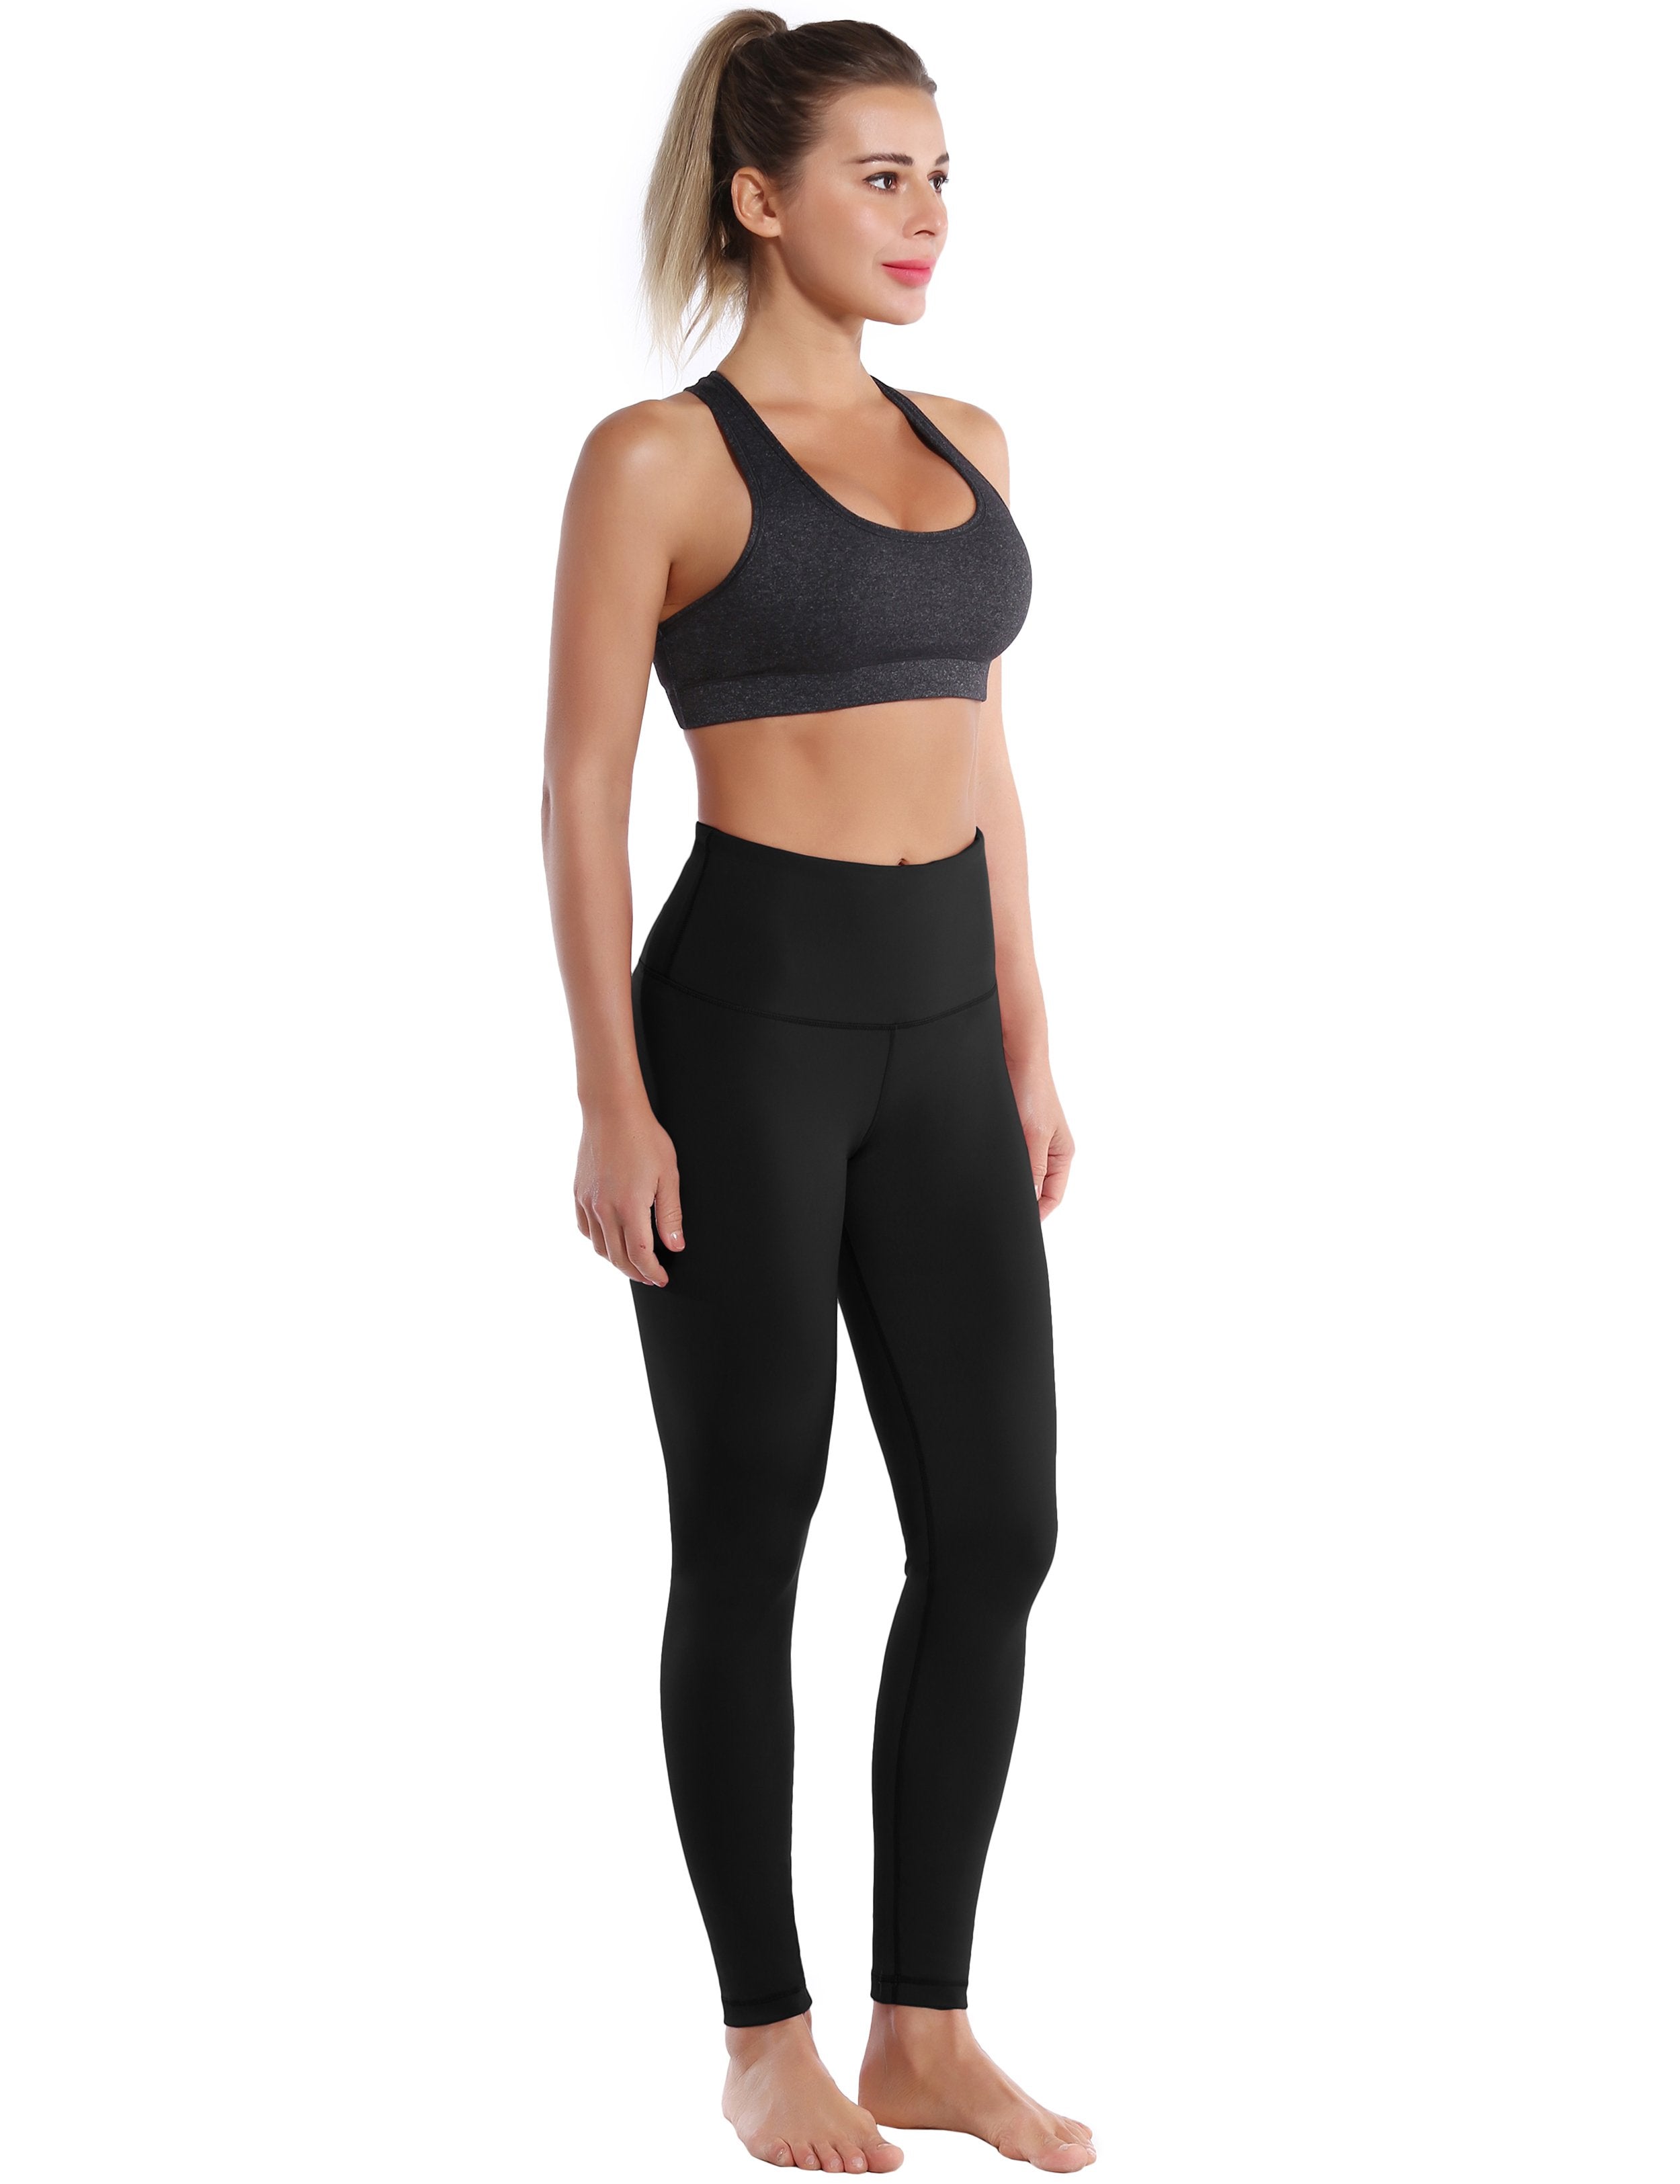 High Waist Golf Pants black 75%Nylon/25%Spandex Fabric doesn't attract lint easily 4-way stretch No see-through Moisture-wicking Tummy control Inner pocket Four lengths